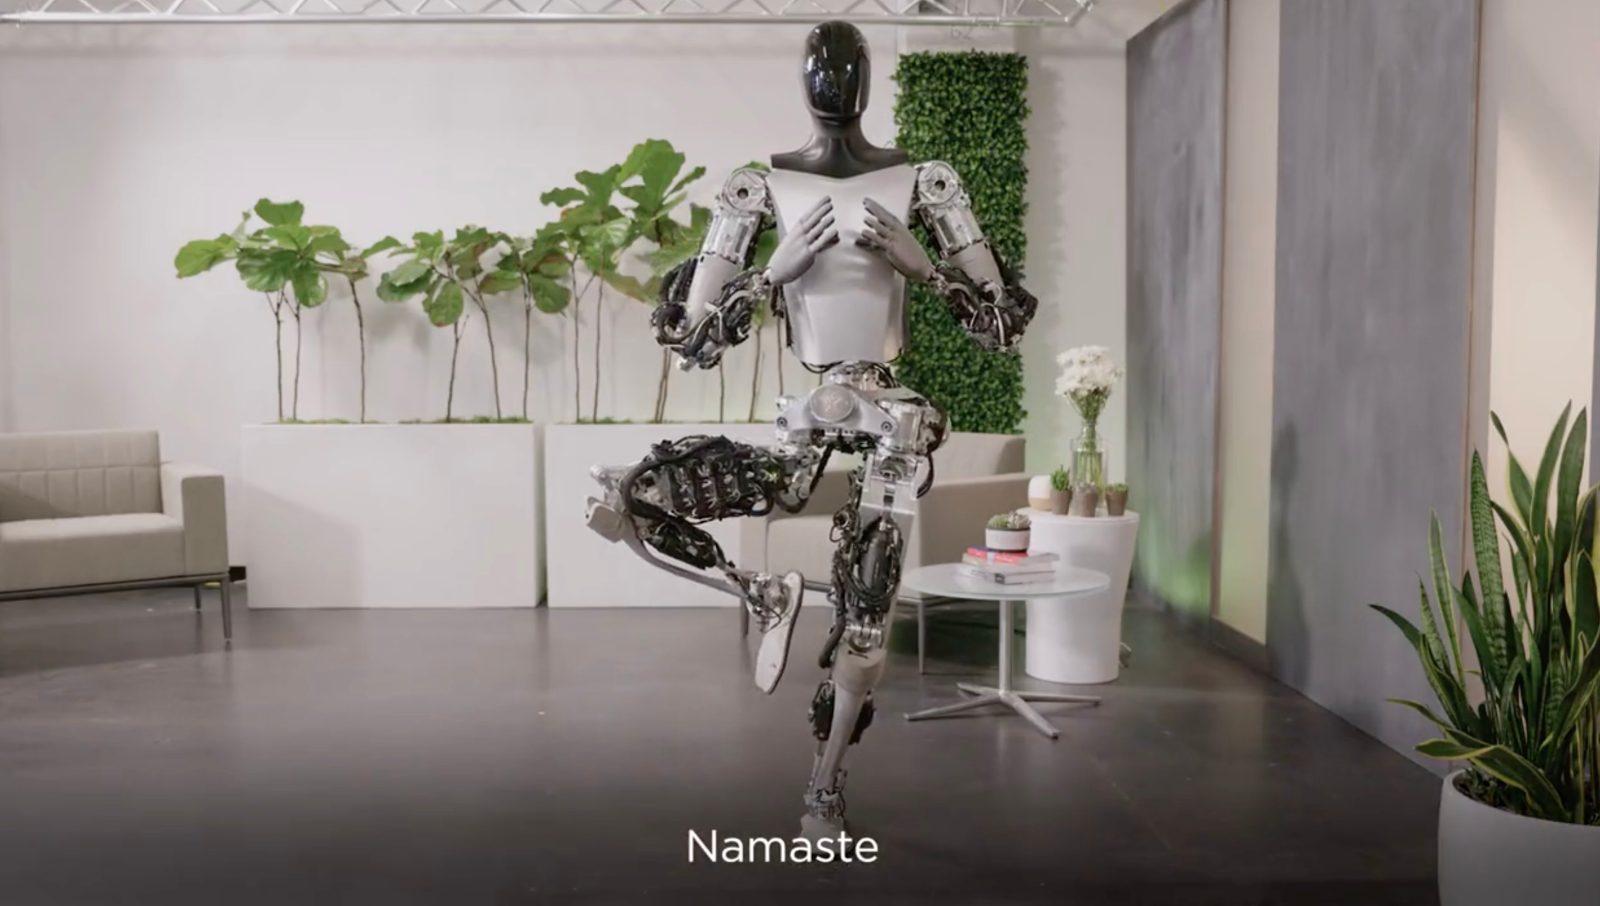 tesla ramps up hiring for humanoid robot, including reinforcement learning